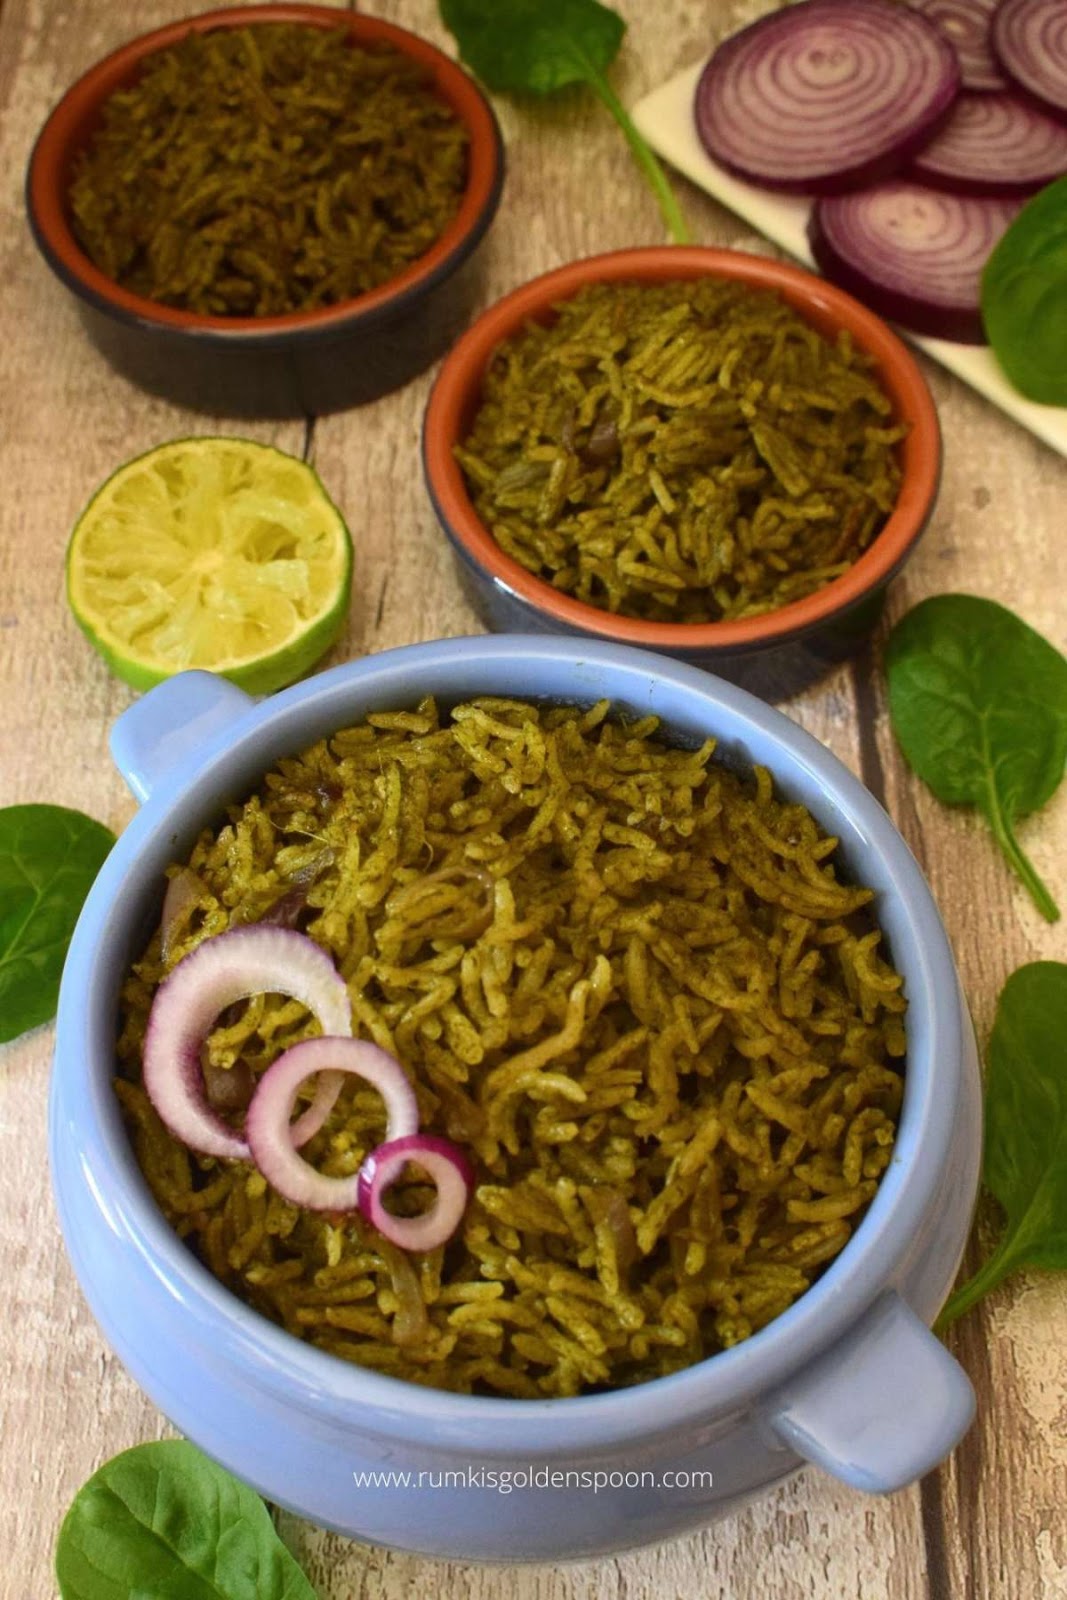 palak rice, palak rice recipe, recipe for palak rice, palak pulao, spinach rice, how to make palak rice, palak pulao recipe, recipe for palak pulao, spinach rice recipe, how to prepare palak rice, palak rice bath, spinach pulao, palak fried rice, palak rice for babies, how to do palak rice, how to make palak pulao, spinach rice recipe indian, palak rice step by step, spinach rice indian, how to make spinach rice, spinach pulao recipe, spinach rice pilaf, rice recipes, rice recipe, with rice recipe, rice recipe vegan, rice recipe vegetarian, rice recipes veg, rice recipe with vegetables, rice recipe Indian, rice recipes indian, Indian rice recipe easy, Rumki's Golden Spoon